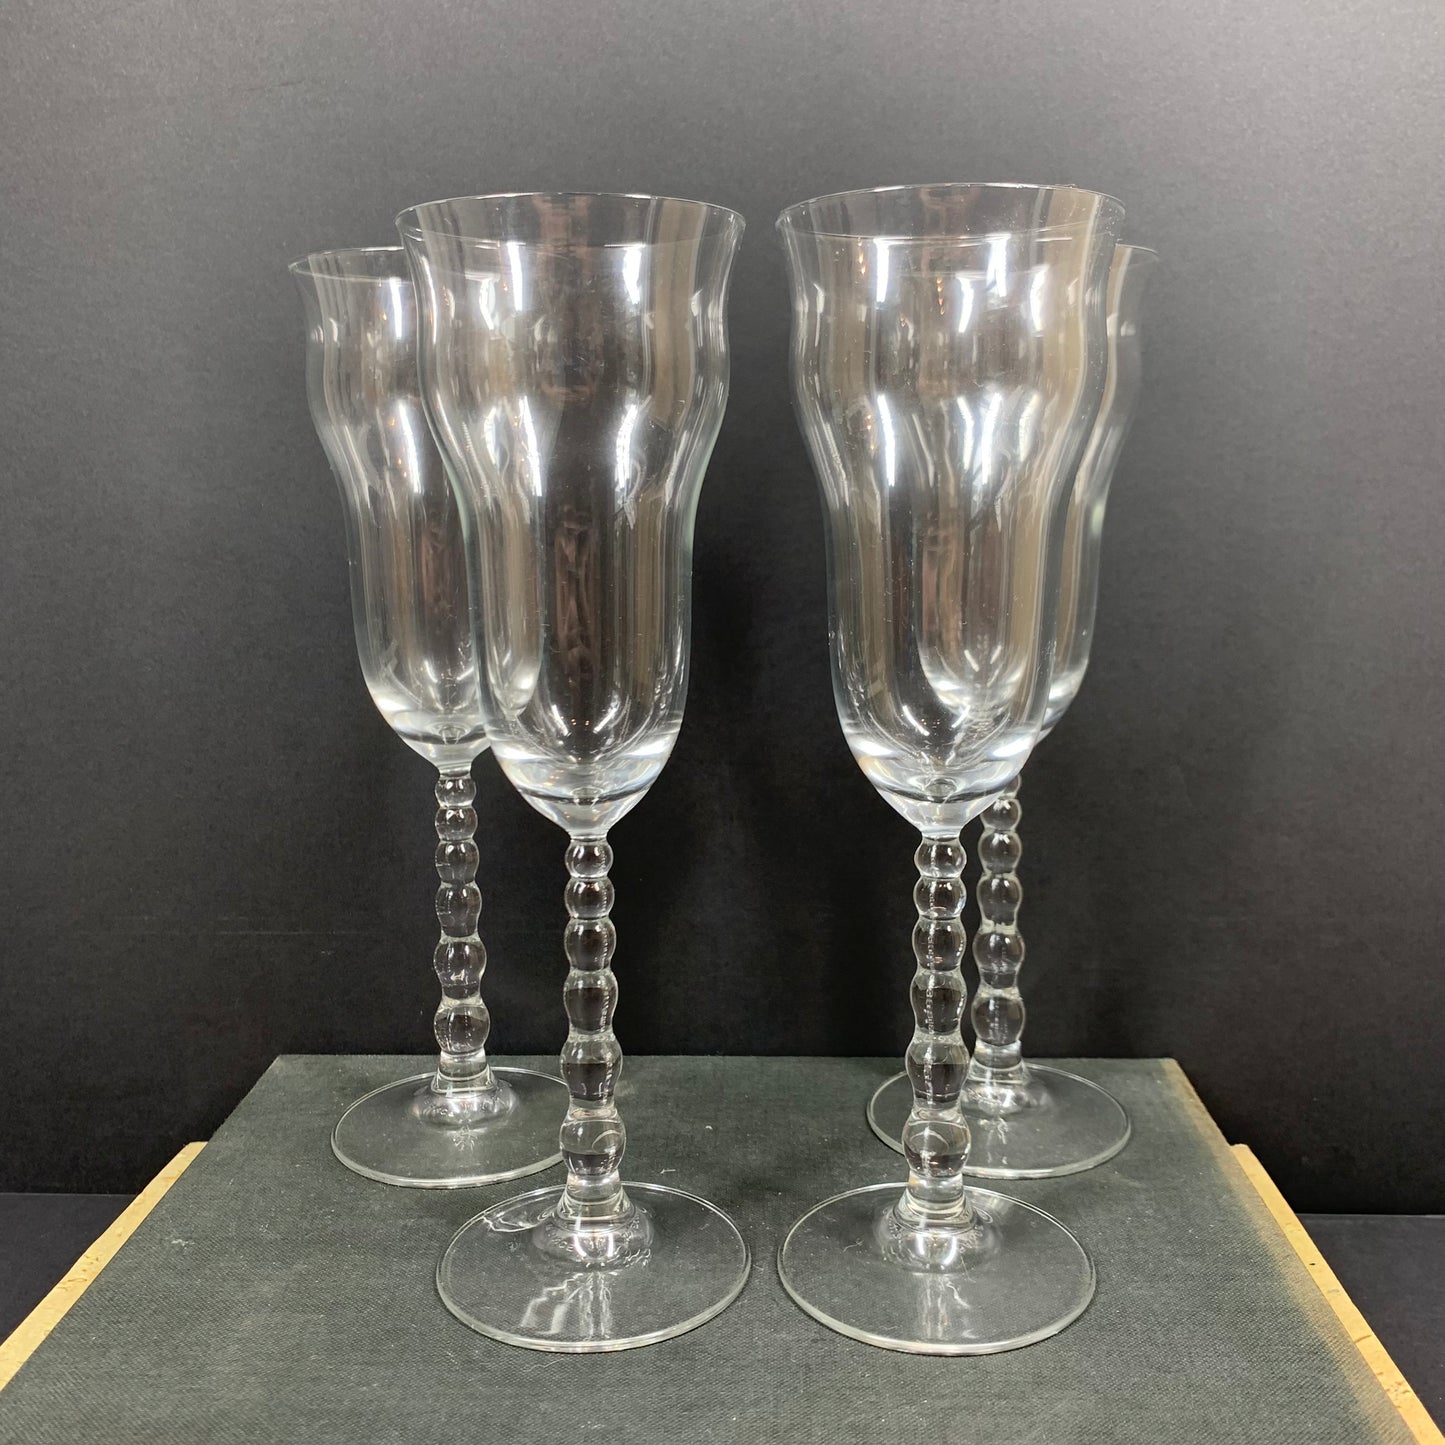 1980s Luminarc glass champagne flutes with droplet stem